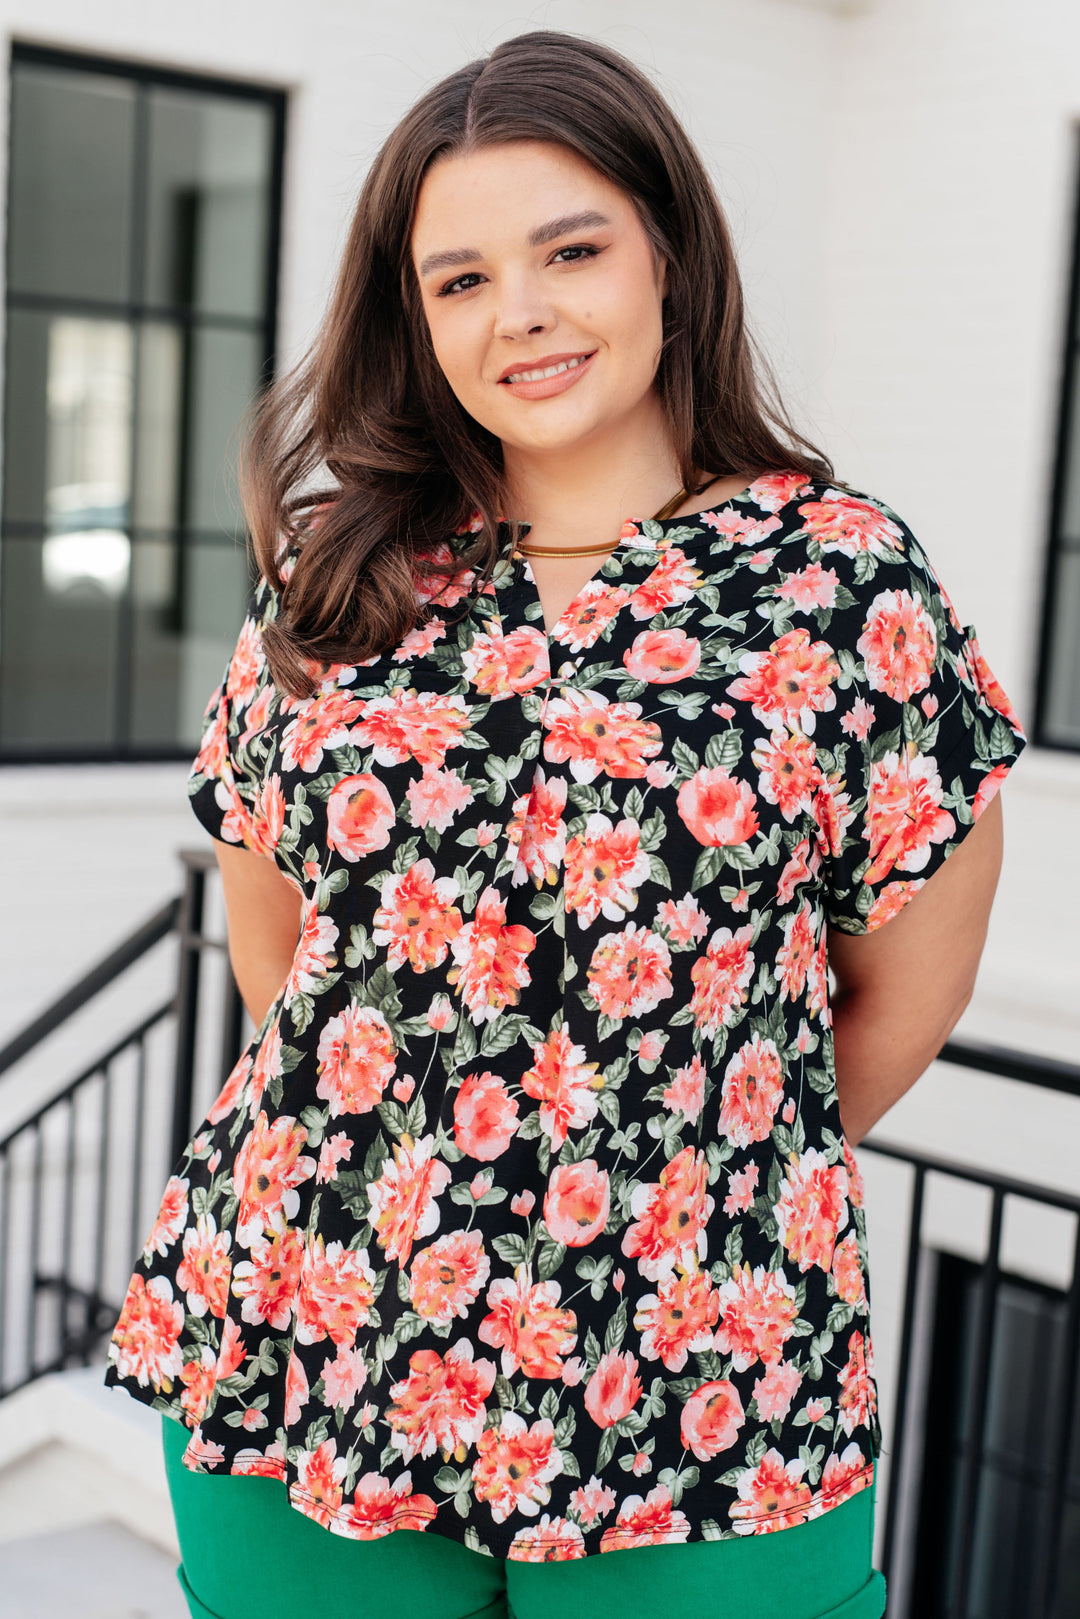 Lizzy Cap Sleeve Top in Black and Coral Floral-Short Sleeve Tops-Inspired by Justeen-Women's Clothing Boutique in Chicago, Illinois